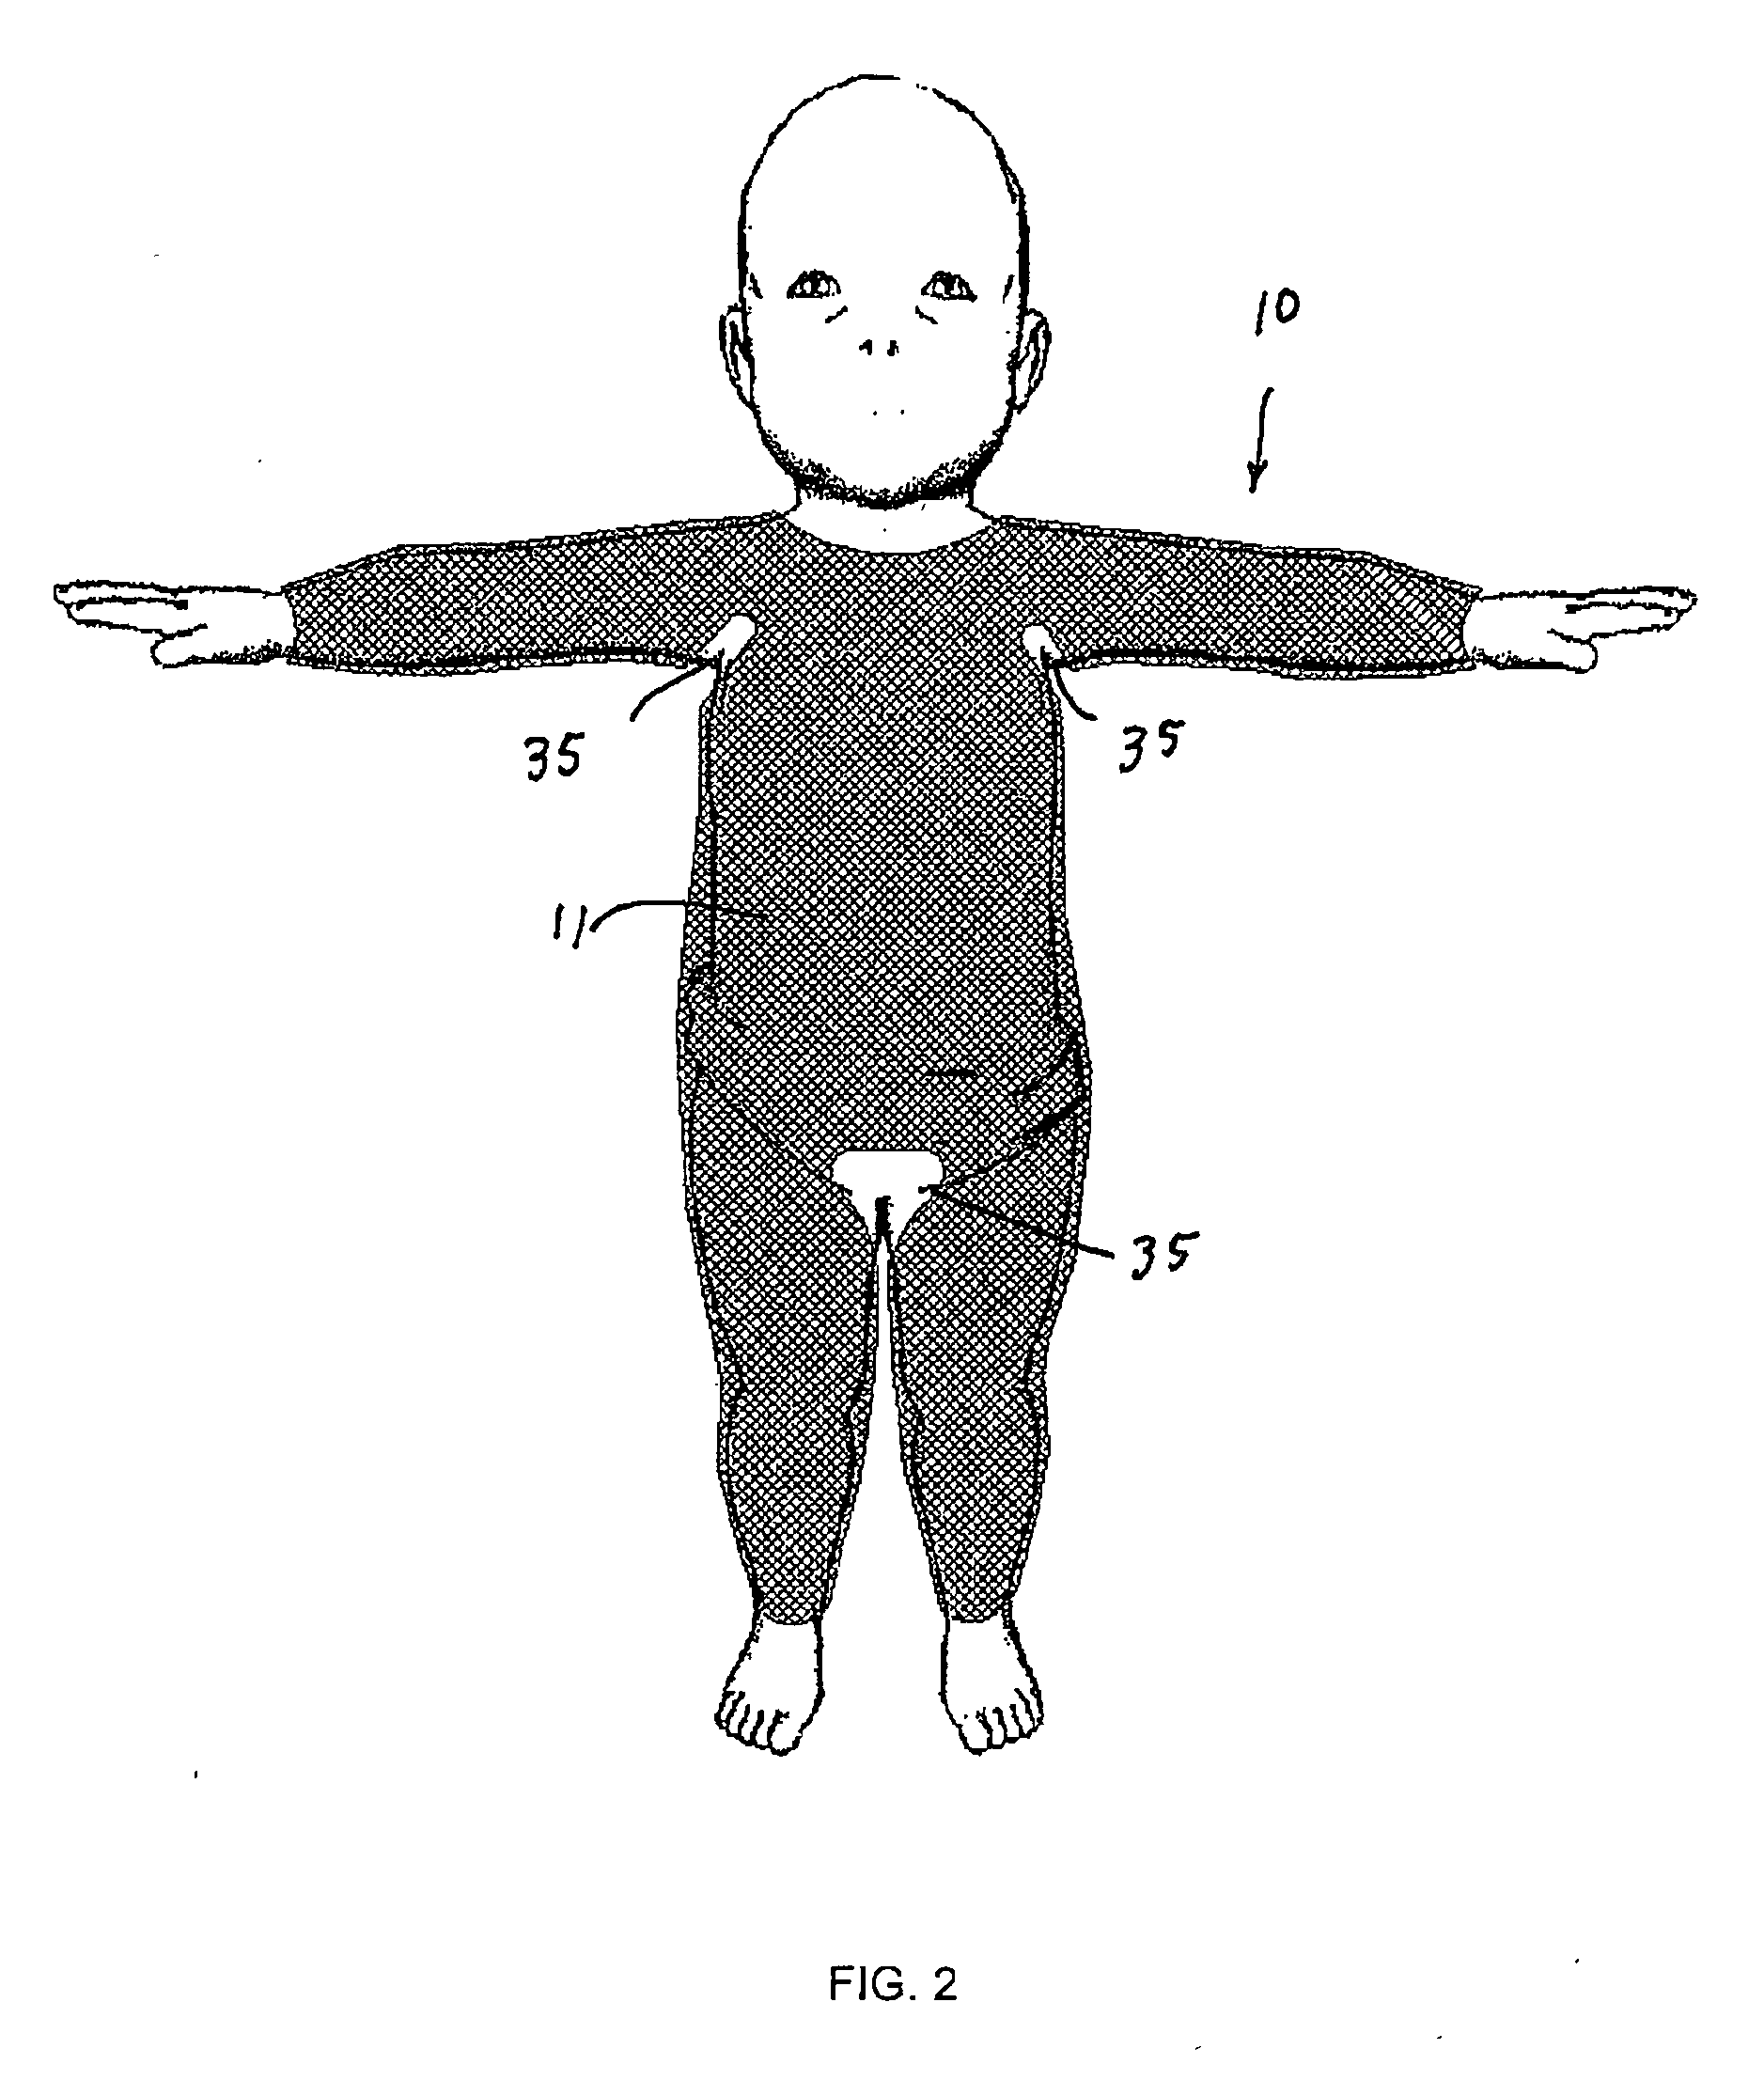 Phototherapy garment